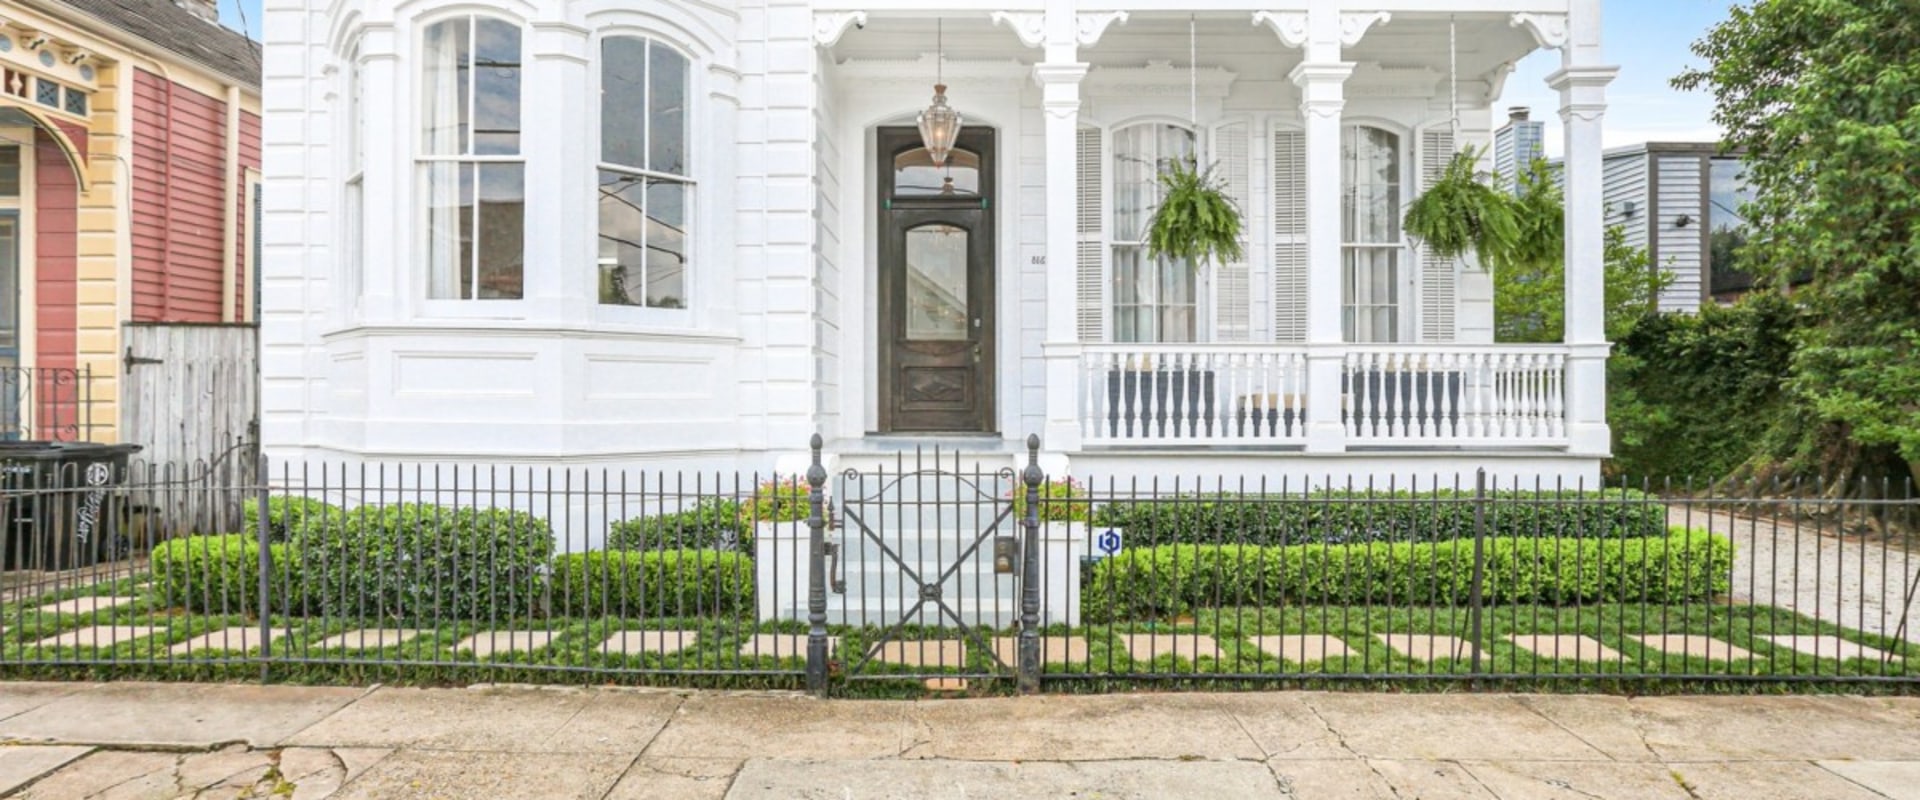 Are there any special considerations for historic homes when it comes to home remodeling in new orleans?